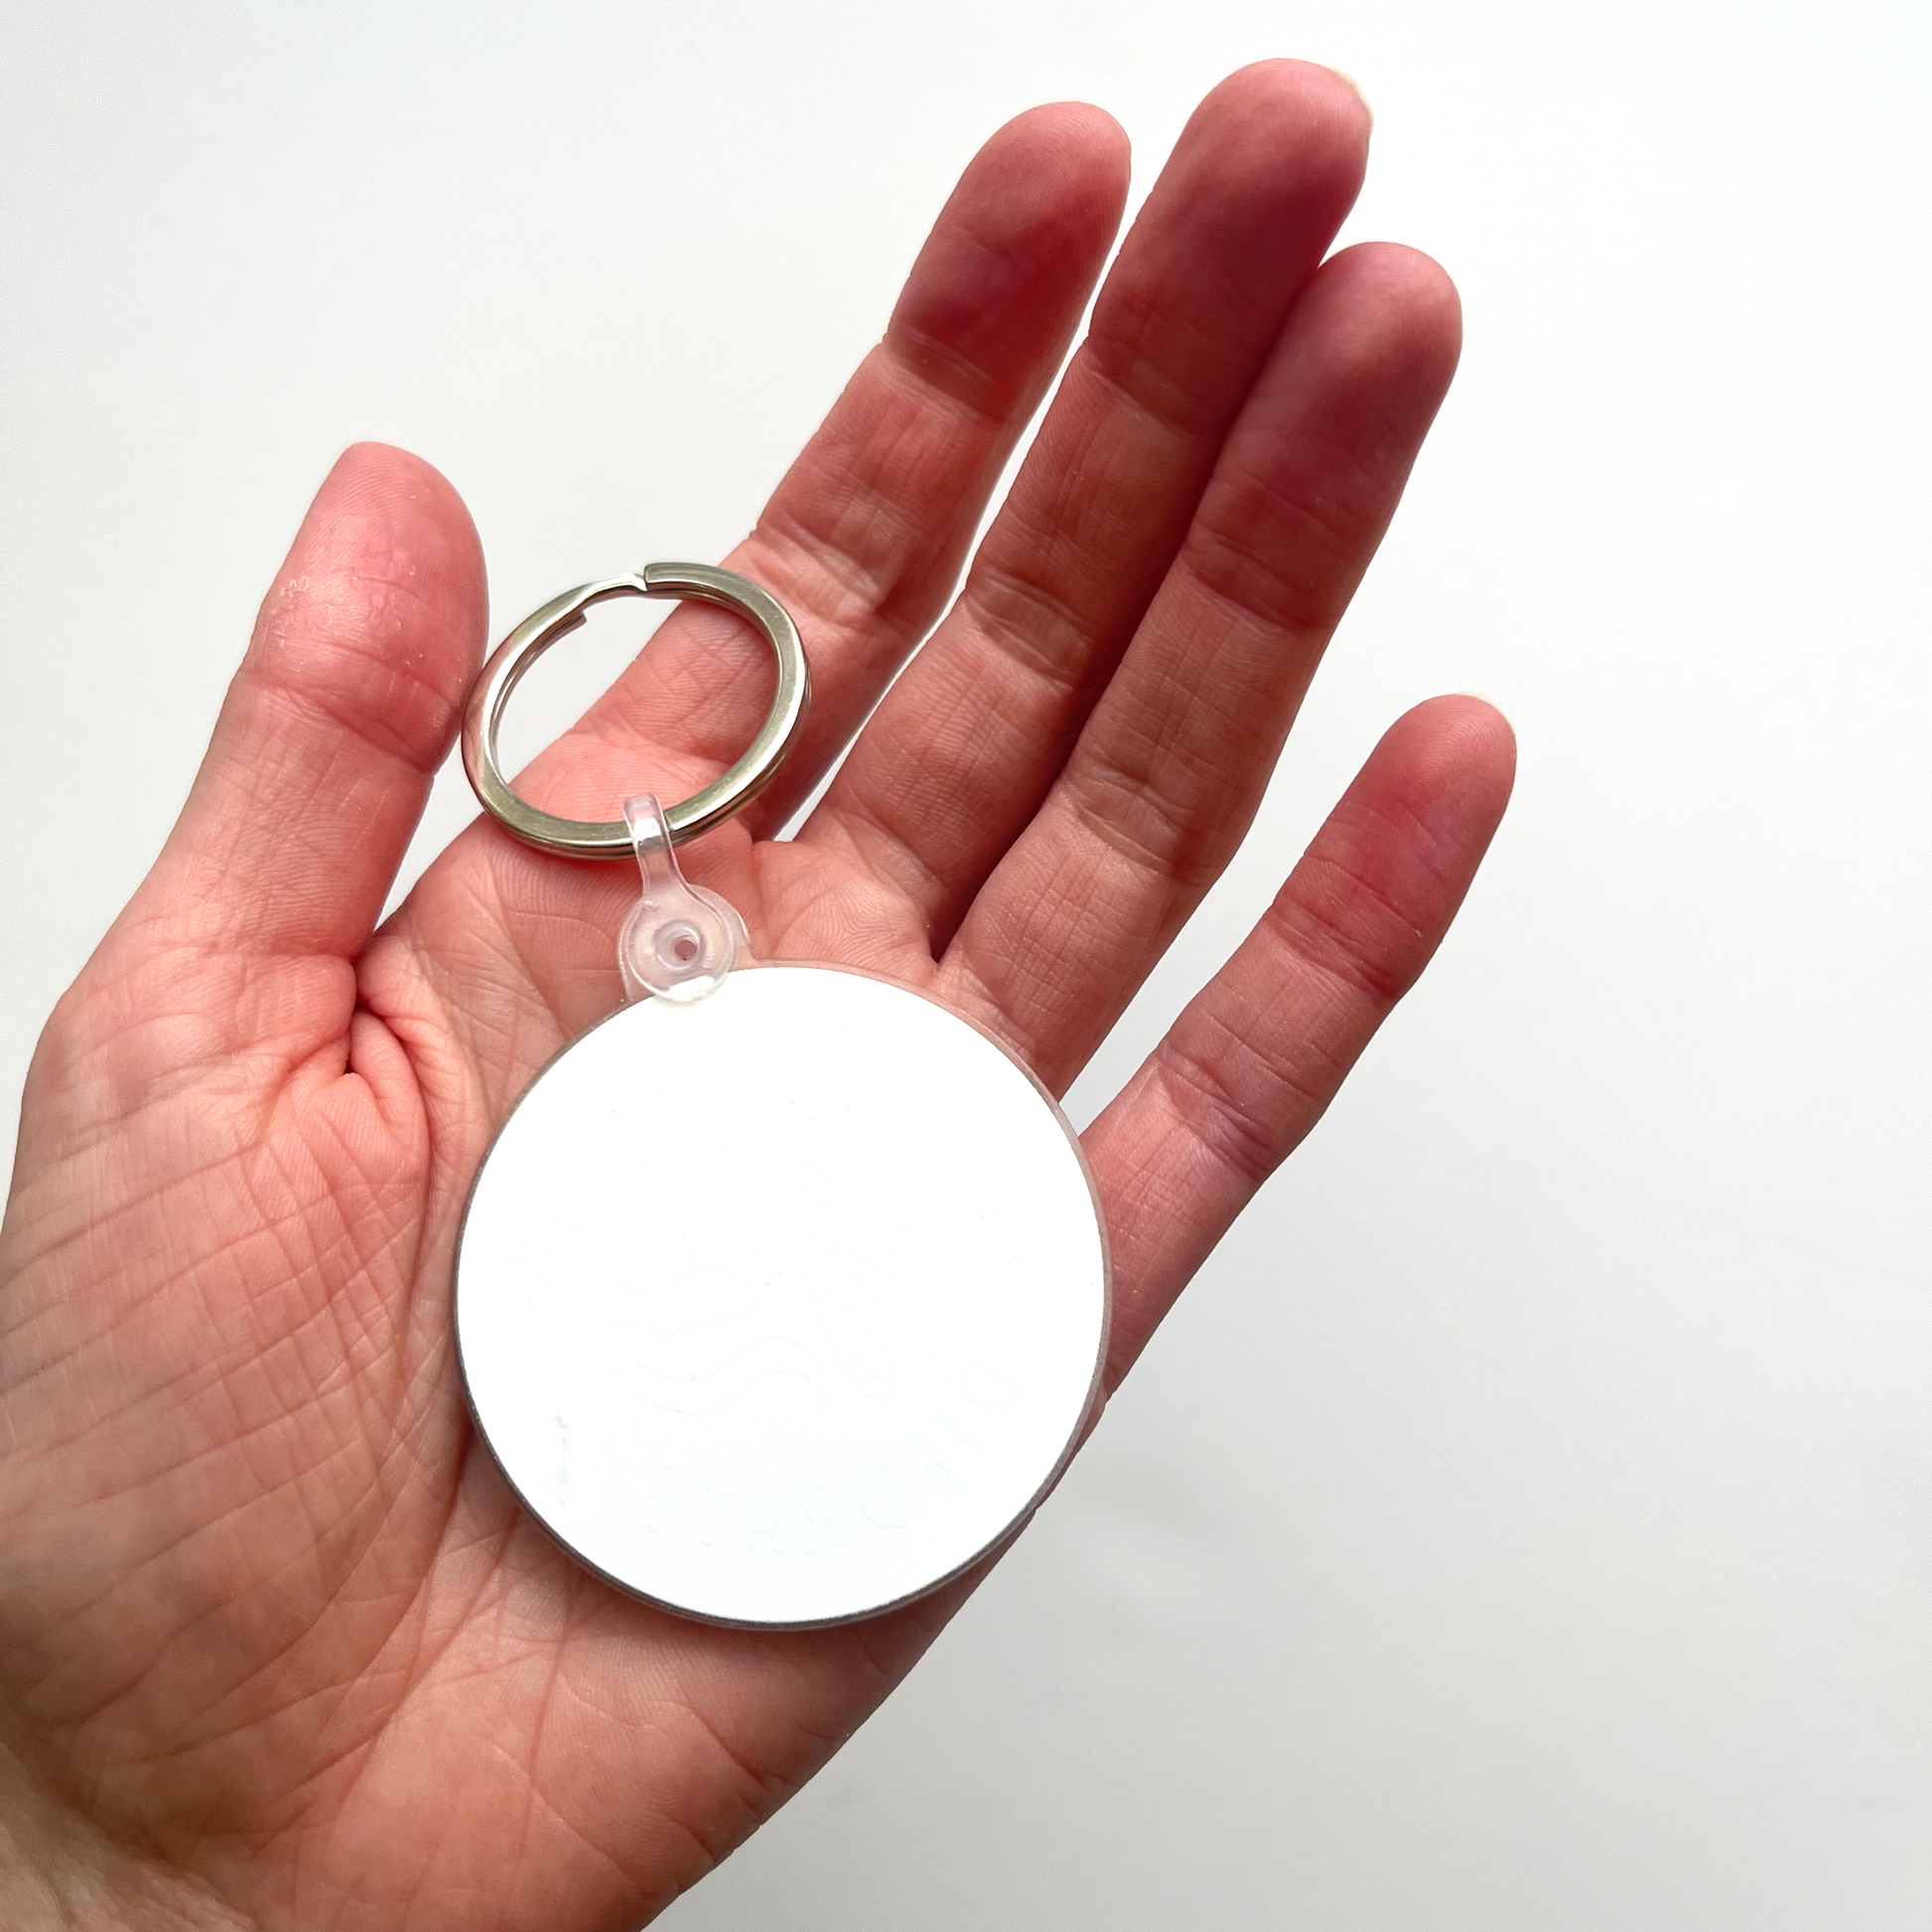 Backside of circle keychain which is blank white